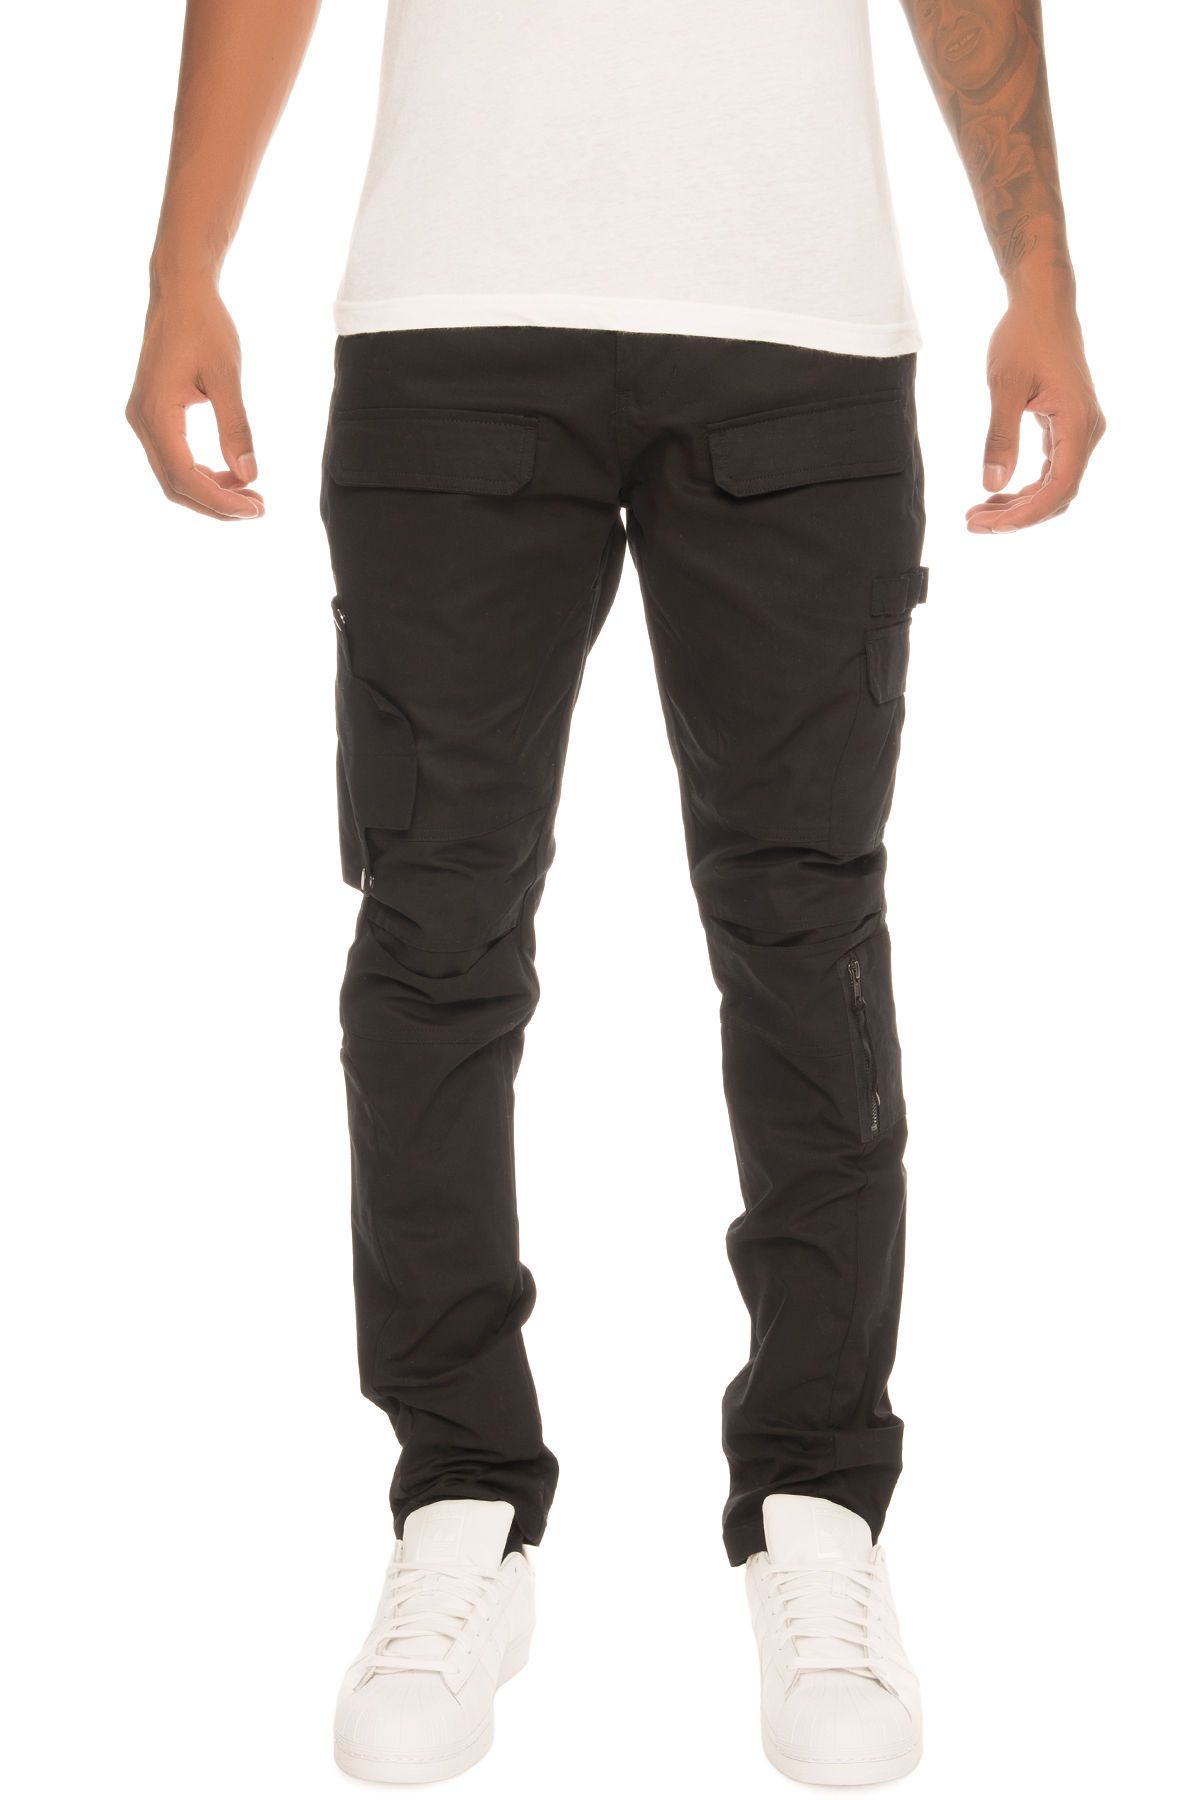 PINK DOLPHIN The Tactical Twill Pants in AF21601TAPBL-BLK - Shiekh